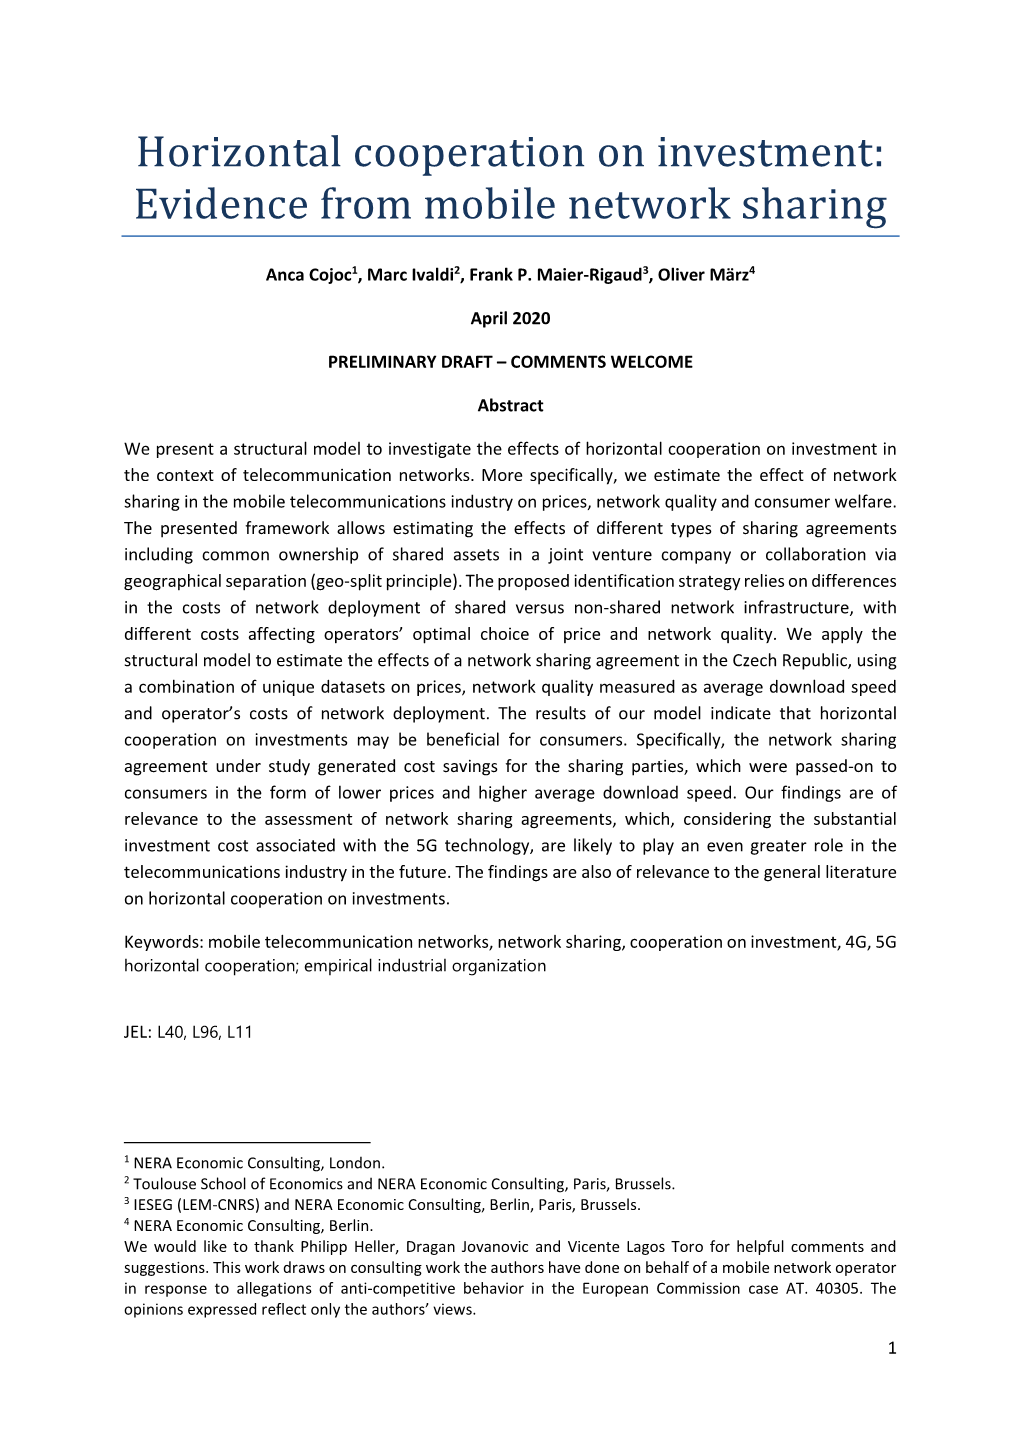 Horizontal Cooperation on Investment: Evidence from Mobile Network Sharing